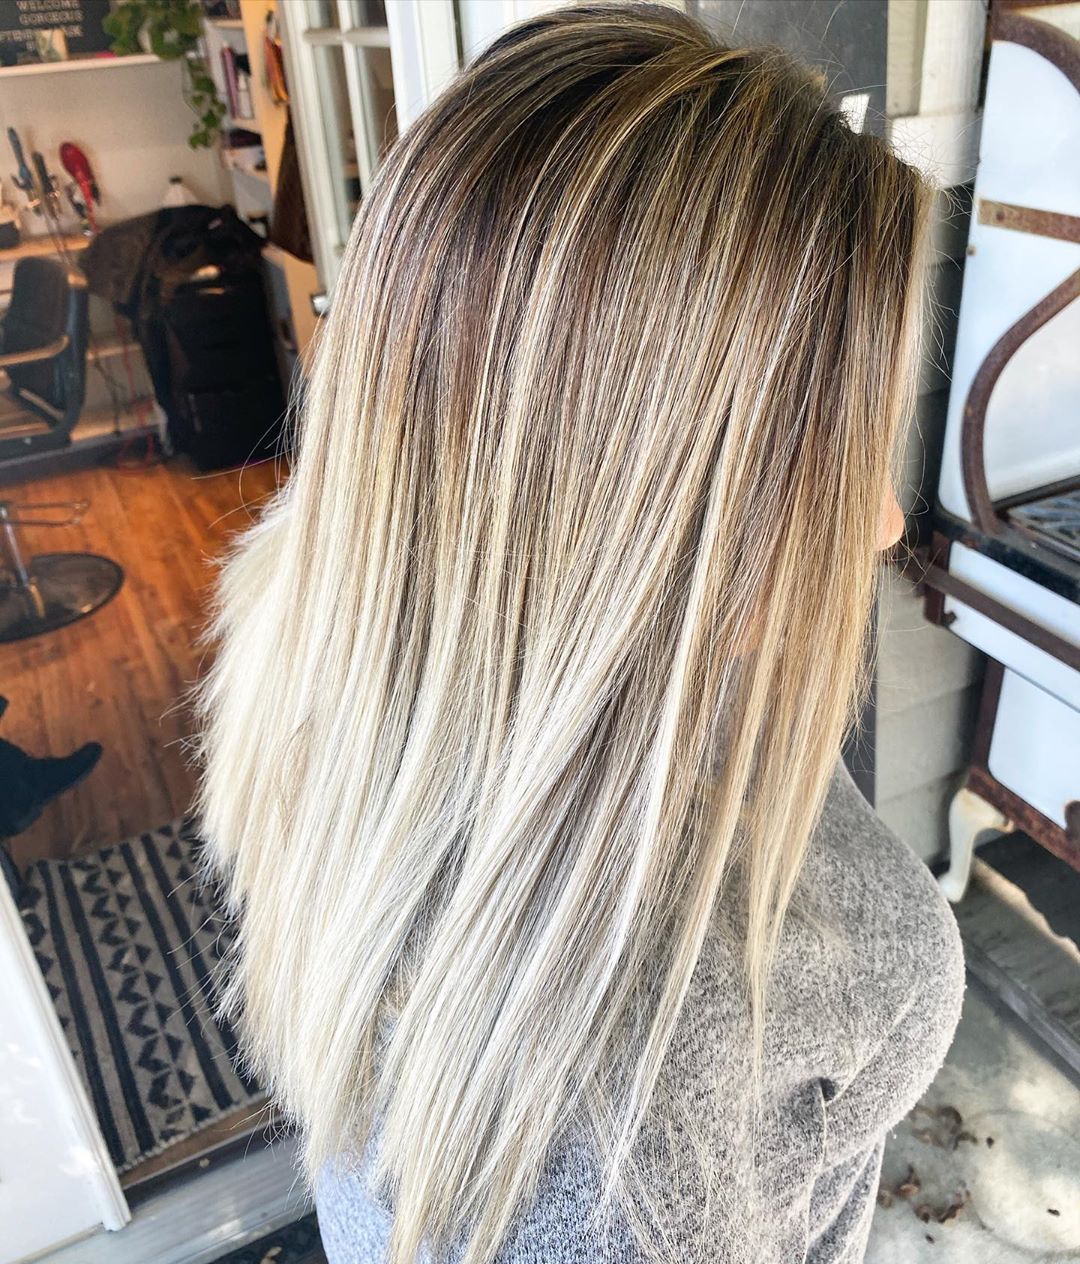 Image of dark roots on a blonde hair style